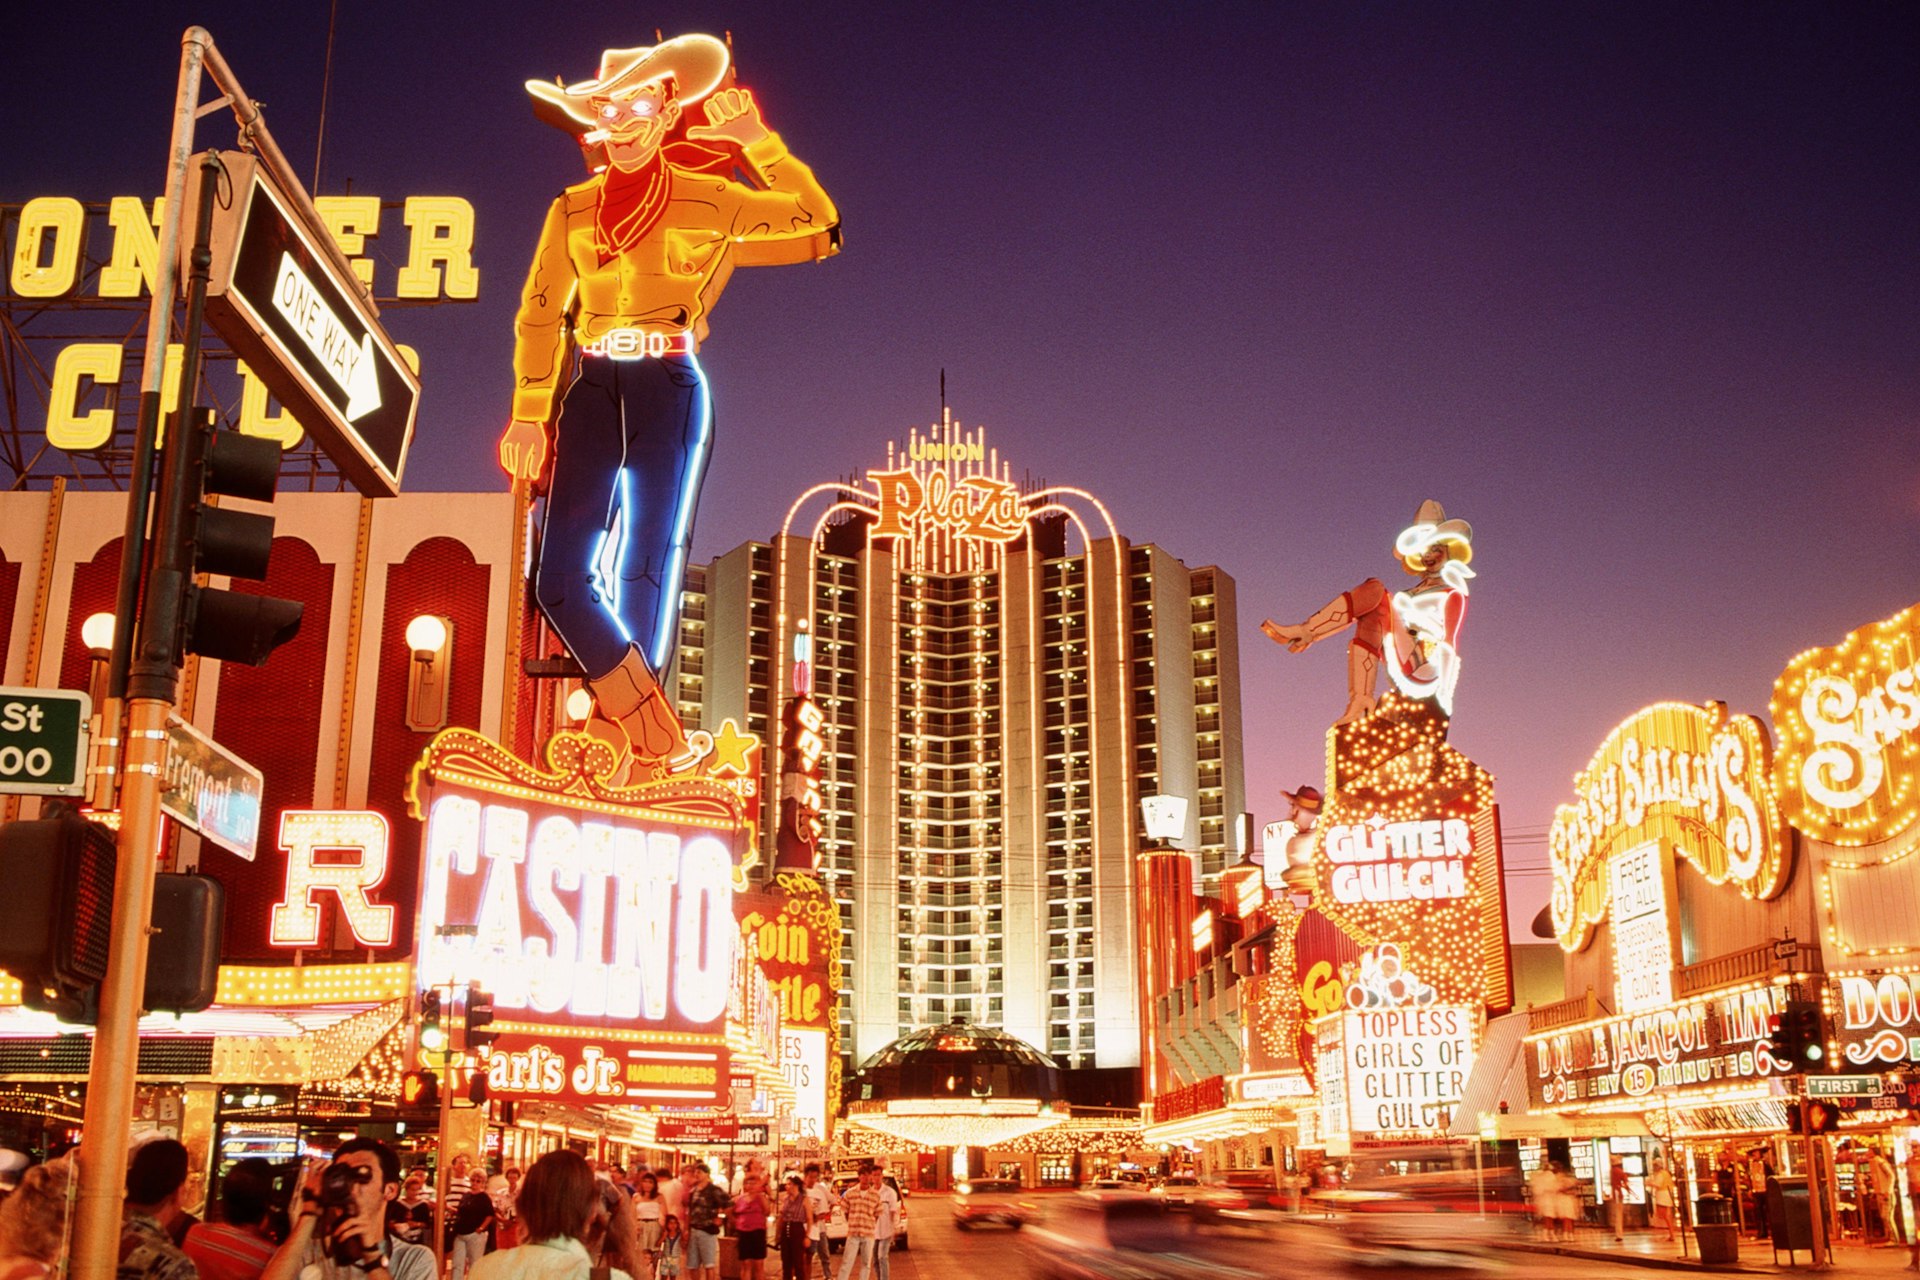 Fremont Street before the light canopy disrupted the sky view. Image by B. Tanaka / The Image Bank / Getty